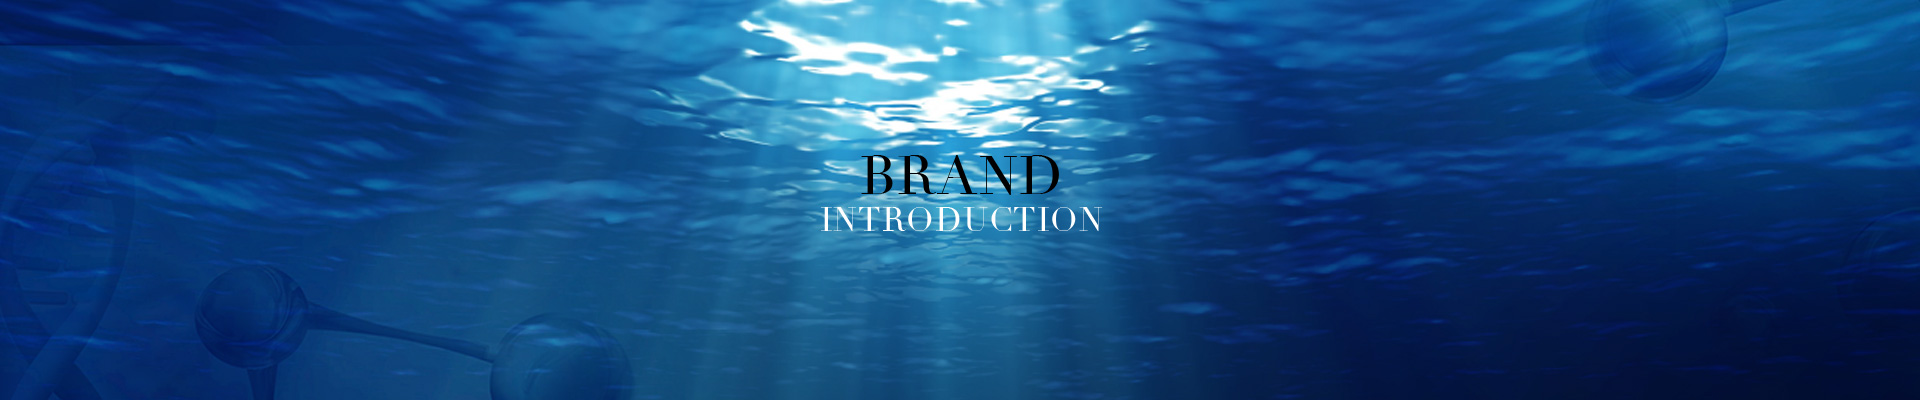 Brand Introduction